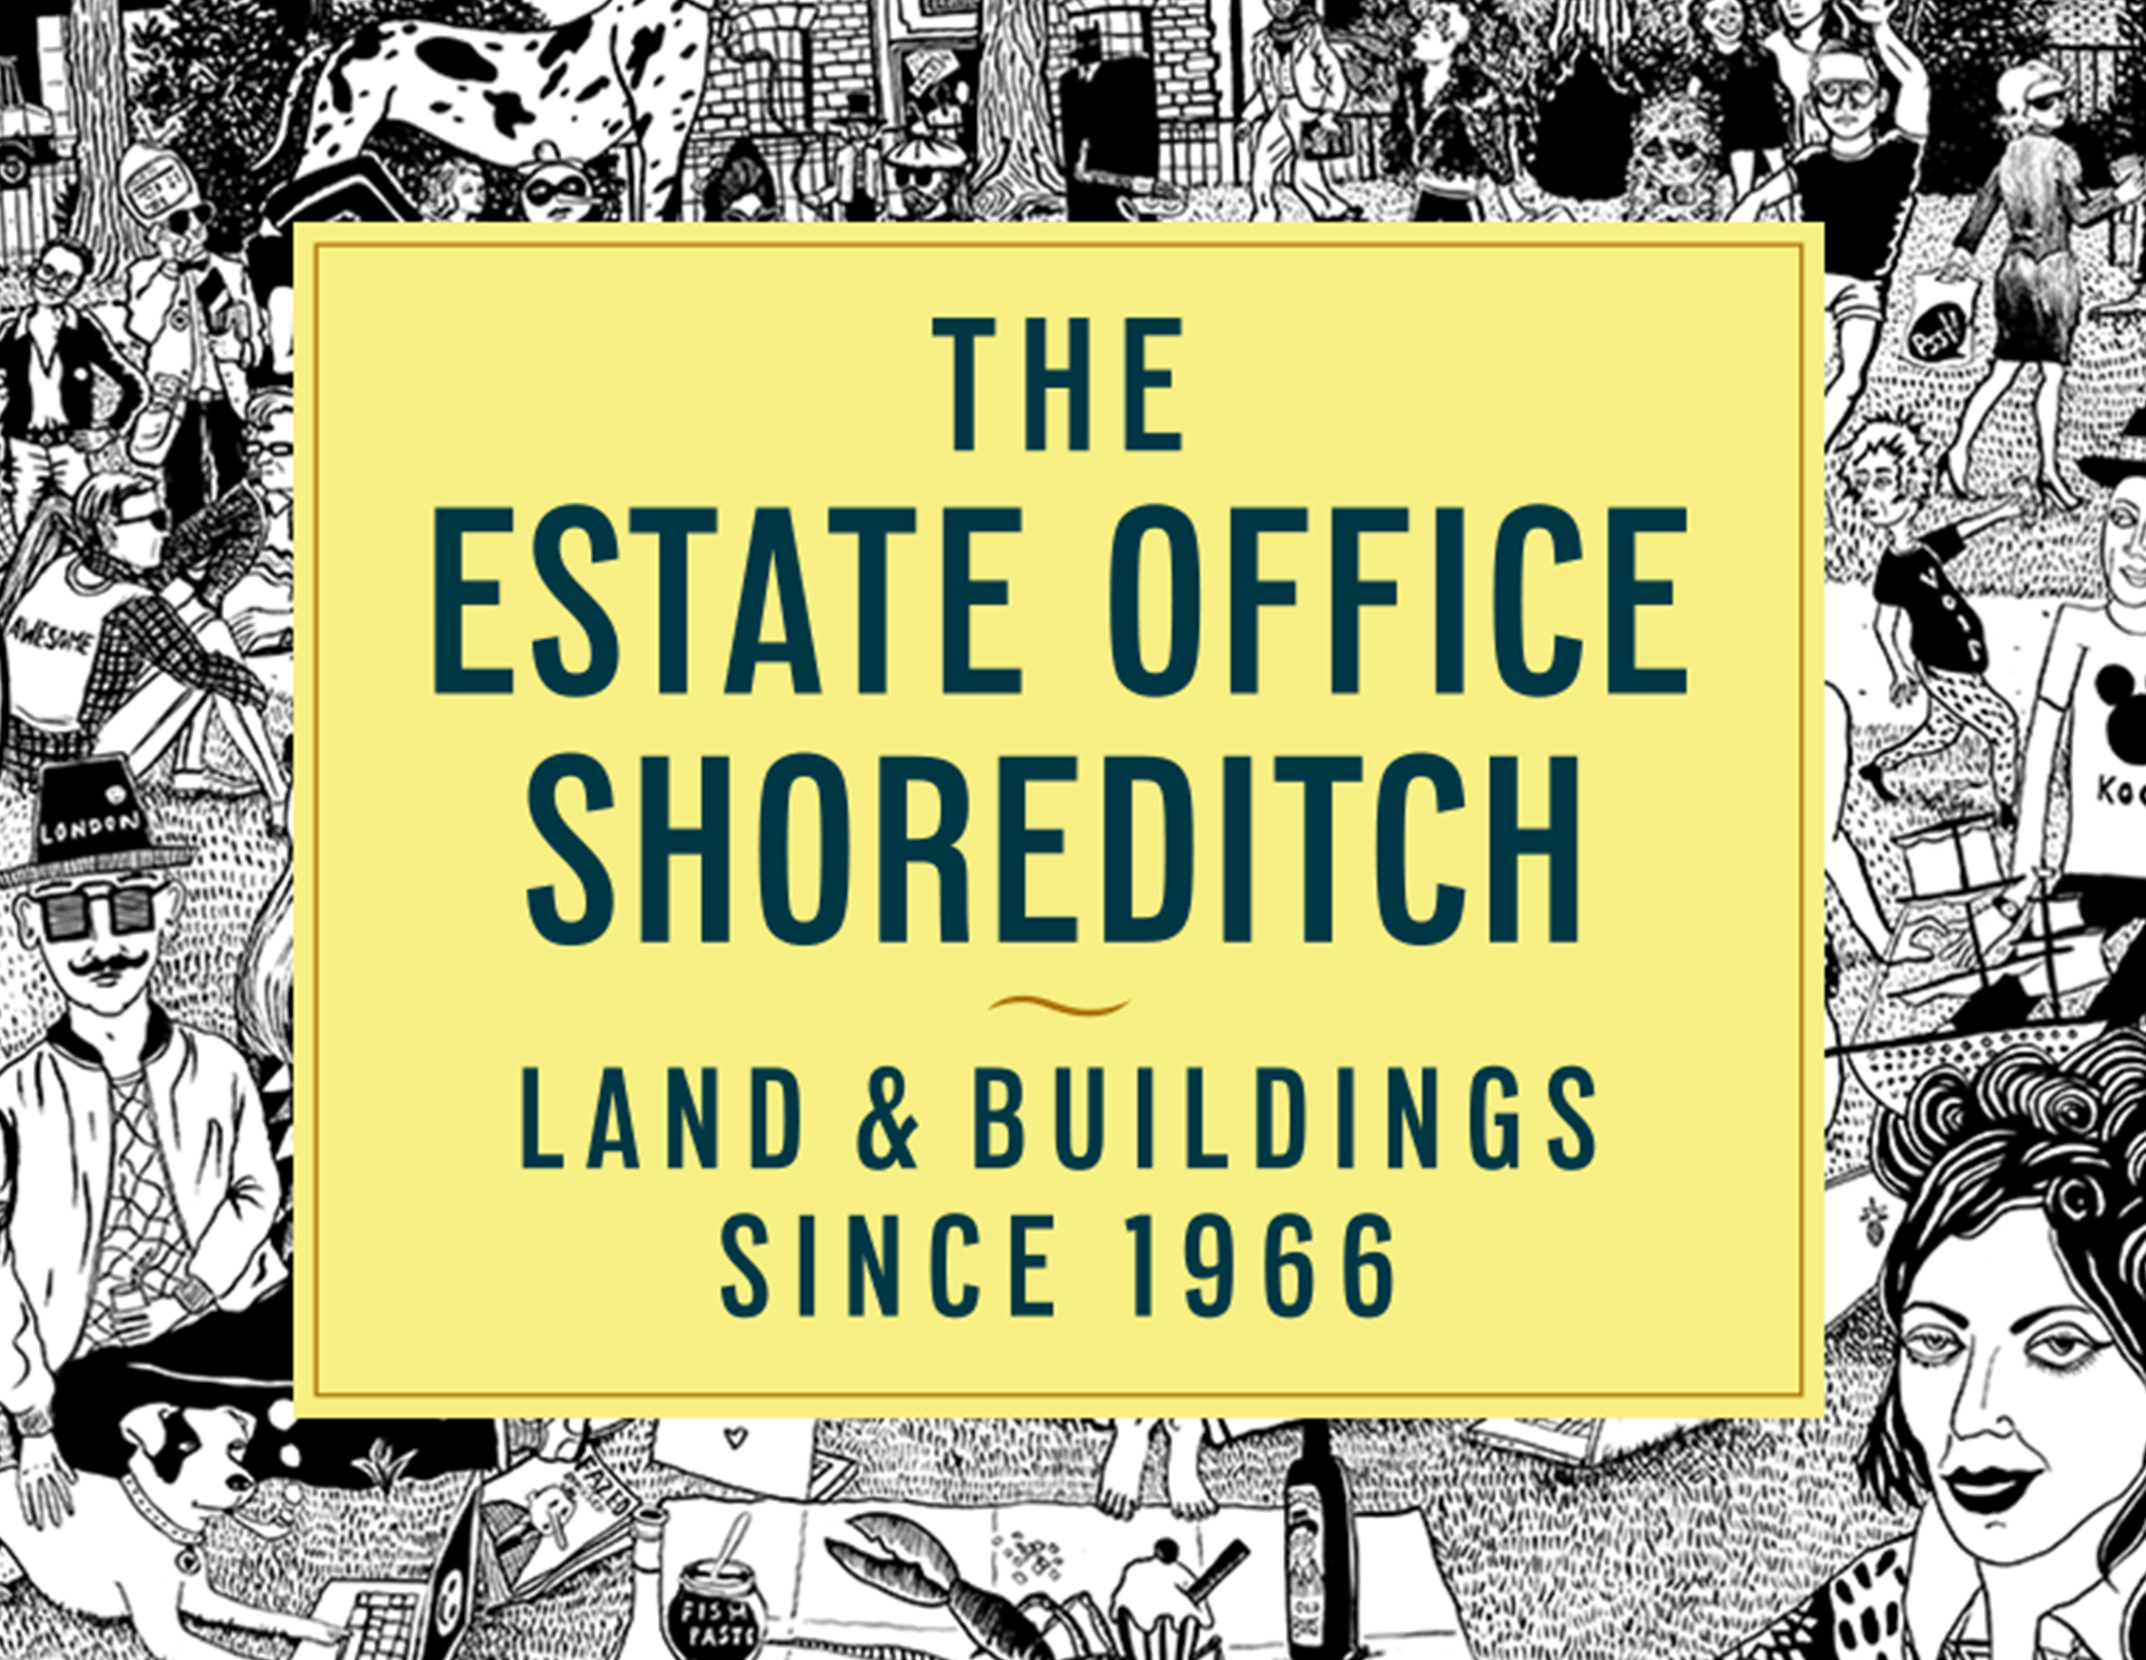 The Shoreditch Estate Office: Brand, Website and Outdoor